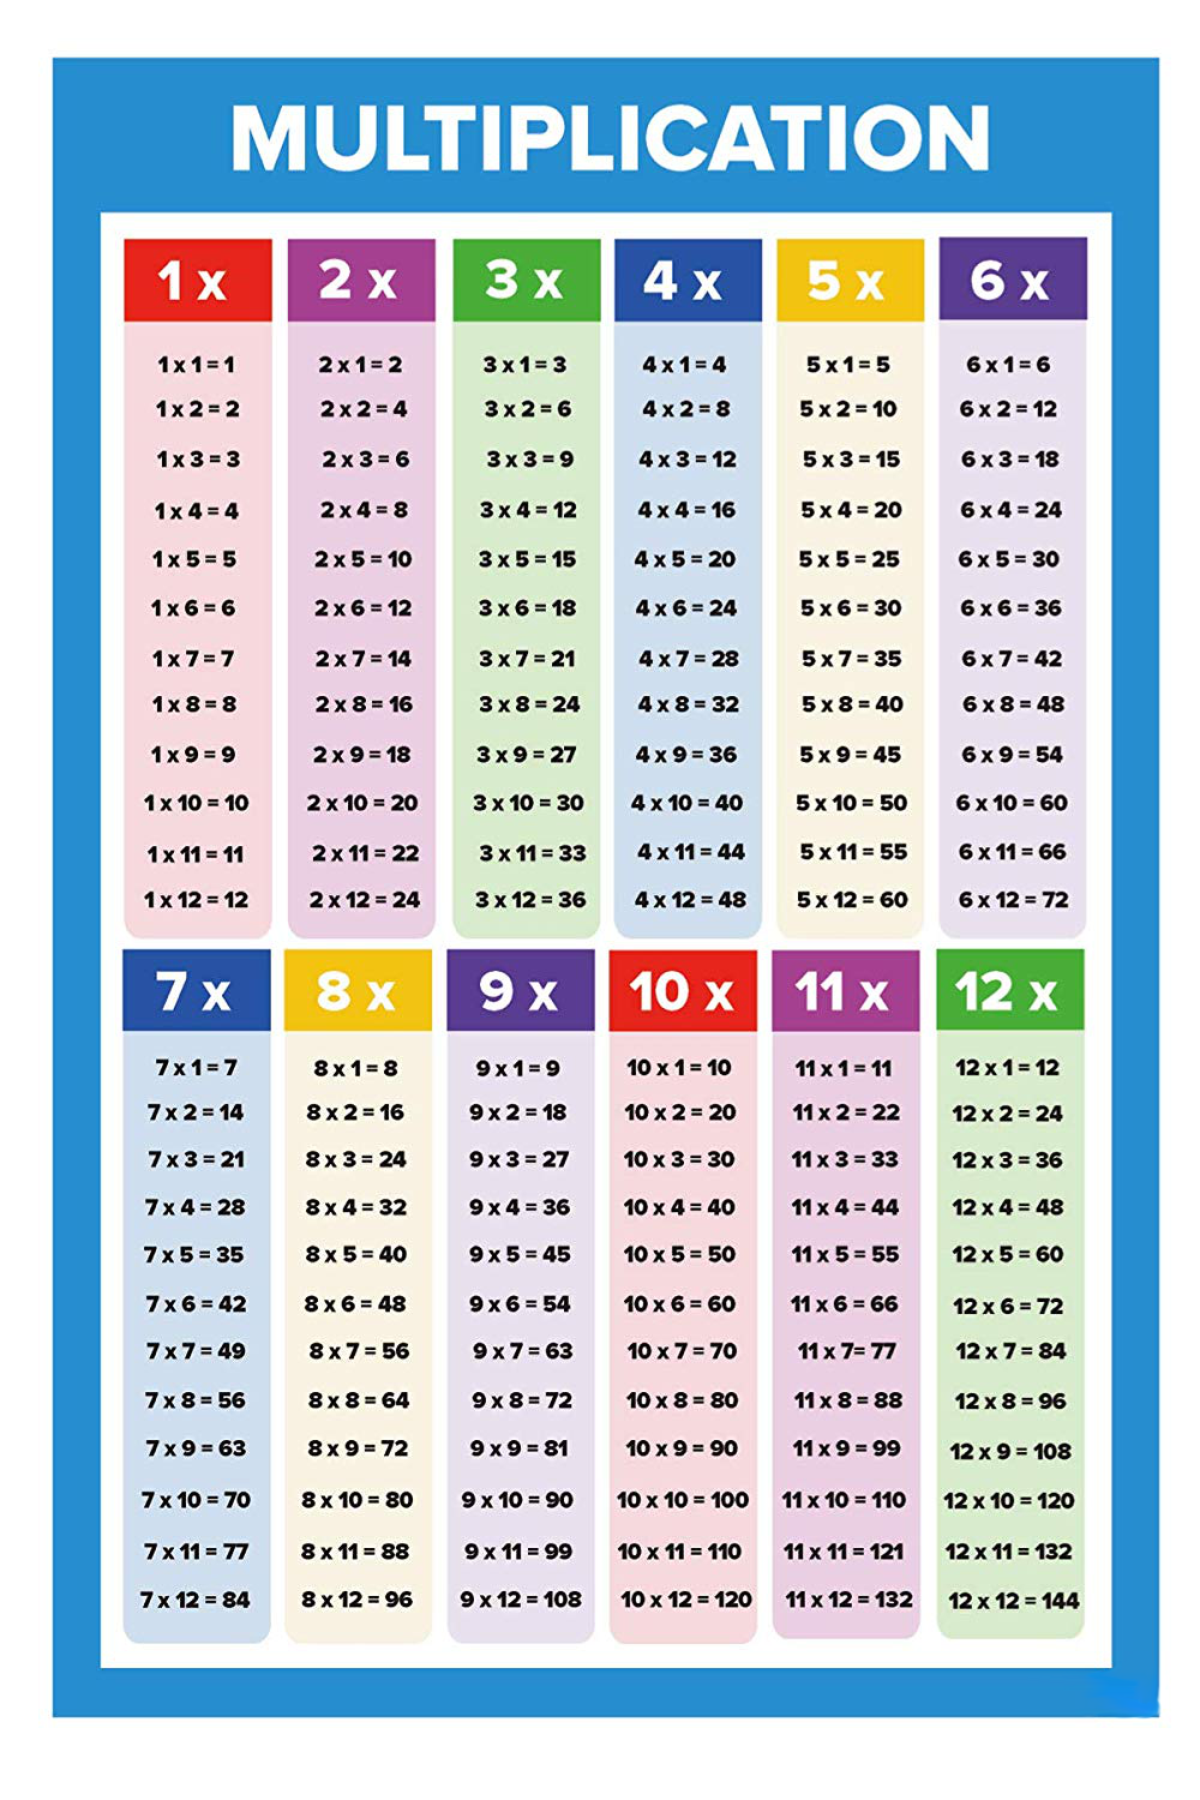 Times Table Chart Times Table Chart Multiplication Chart Free Images